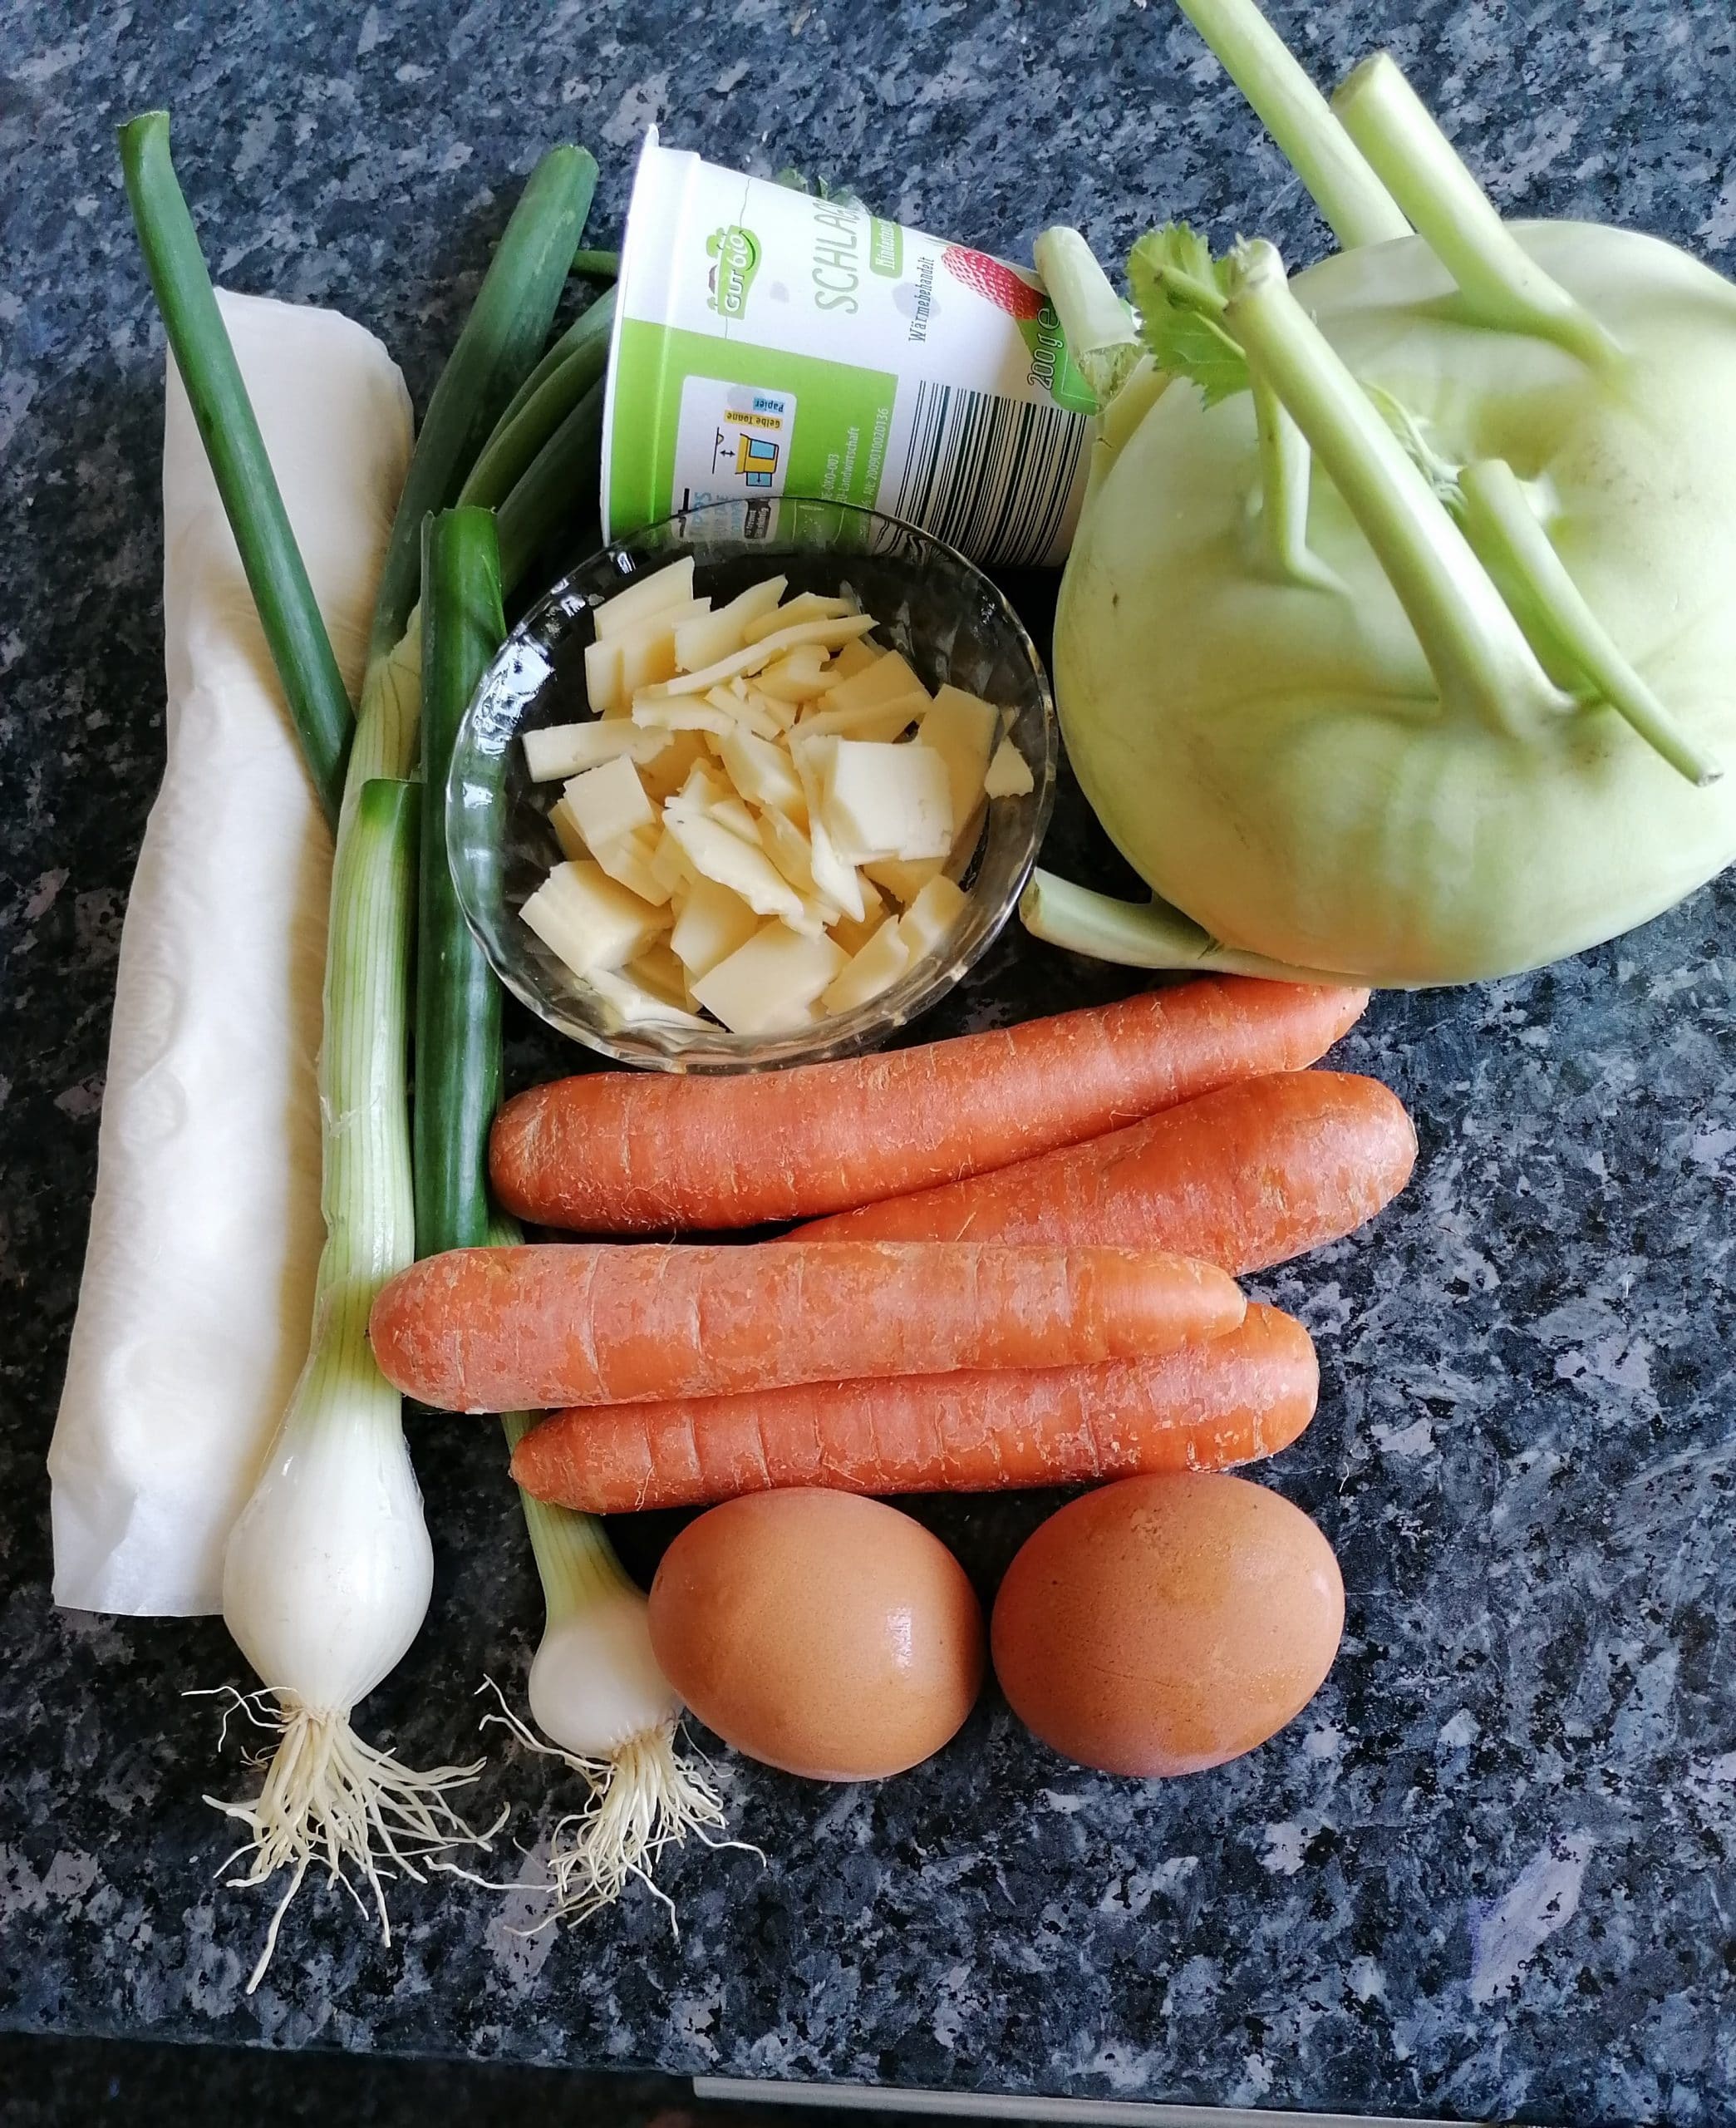 A vibrant photo showcasing the fresh ingredients for making Kohlrabi Quiche: kohlrabi bulbs, carrots, spring onions, Gouda cheese, eggs, heavy cream, and store-bought puff pastry arranged on a kitchen counter. A delightful and wholesome combination for crafting a delicious quiche.